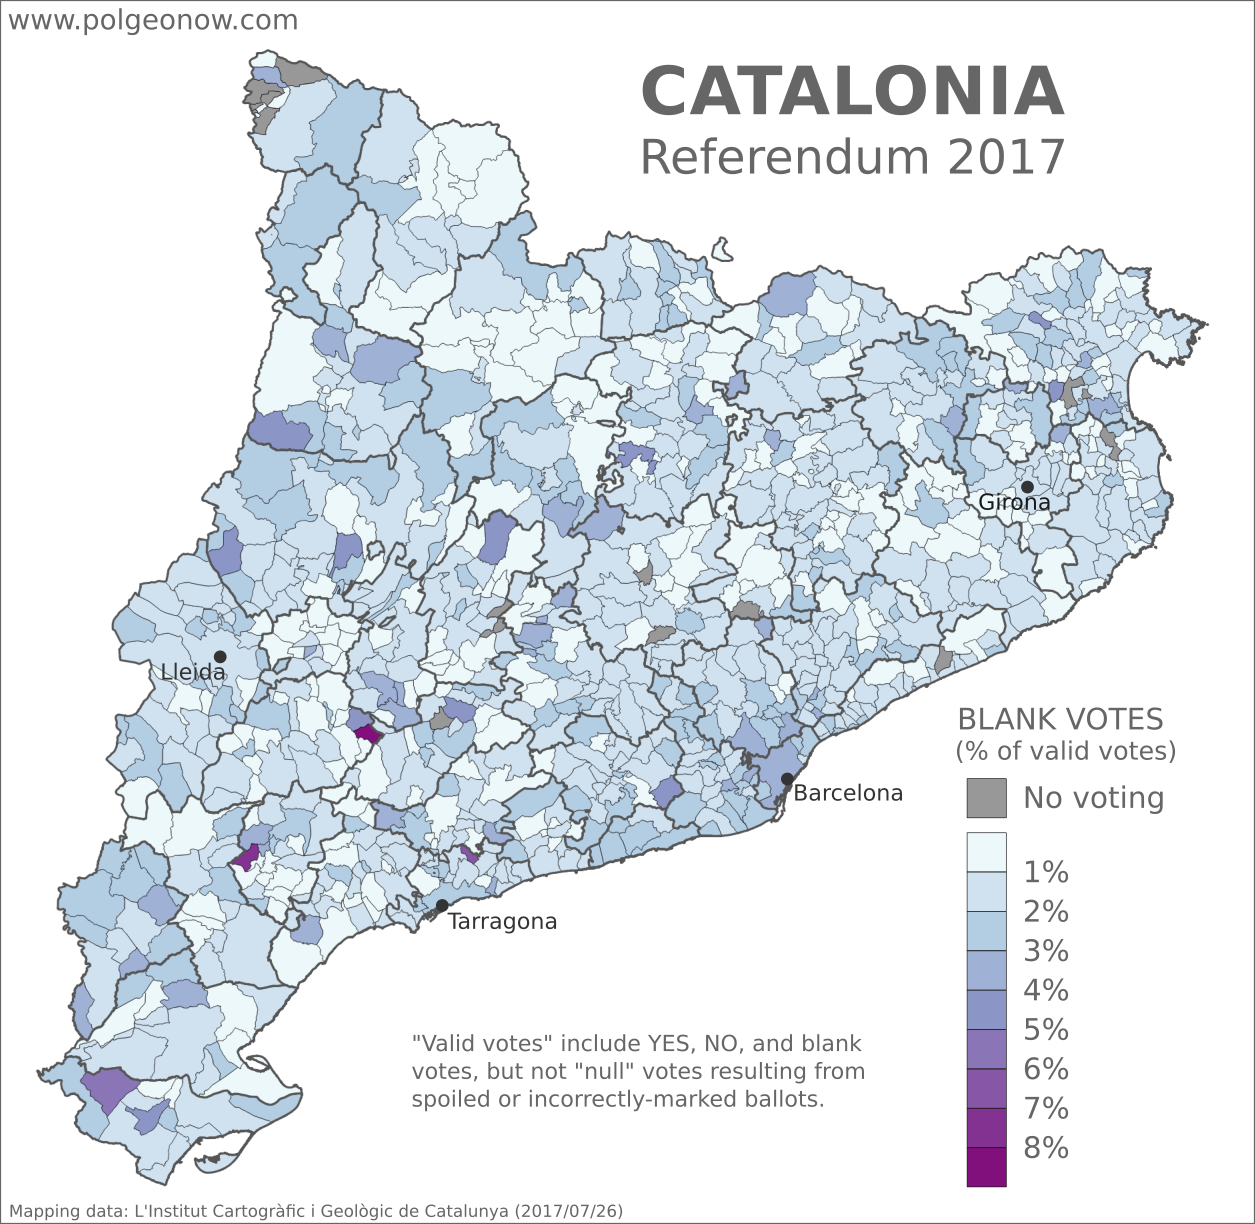 Catalan referendum 2017 map: Detailed, municipality-level map of results in Catalonia's disputed October 2017 referendum on independence from Spain, showing proportion of blank votes in each municipality. Boundaries of comarques (comarcas) shown. Labels cities of Barcelona, Tarragona, Lleida, and Girona. Colorblind accessible.